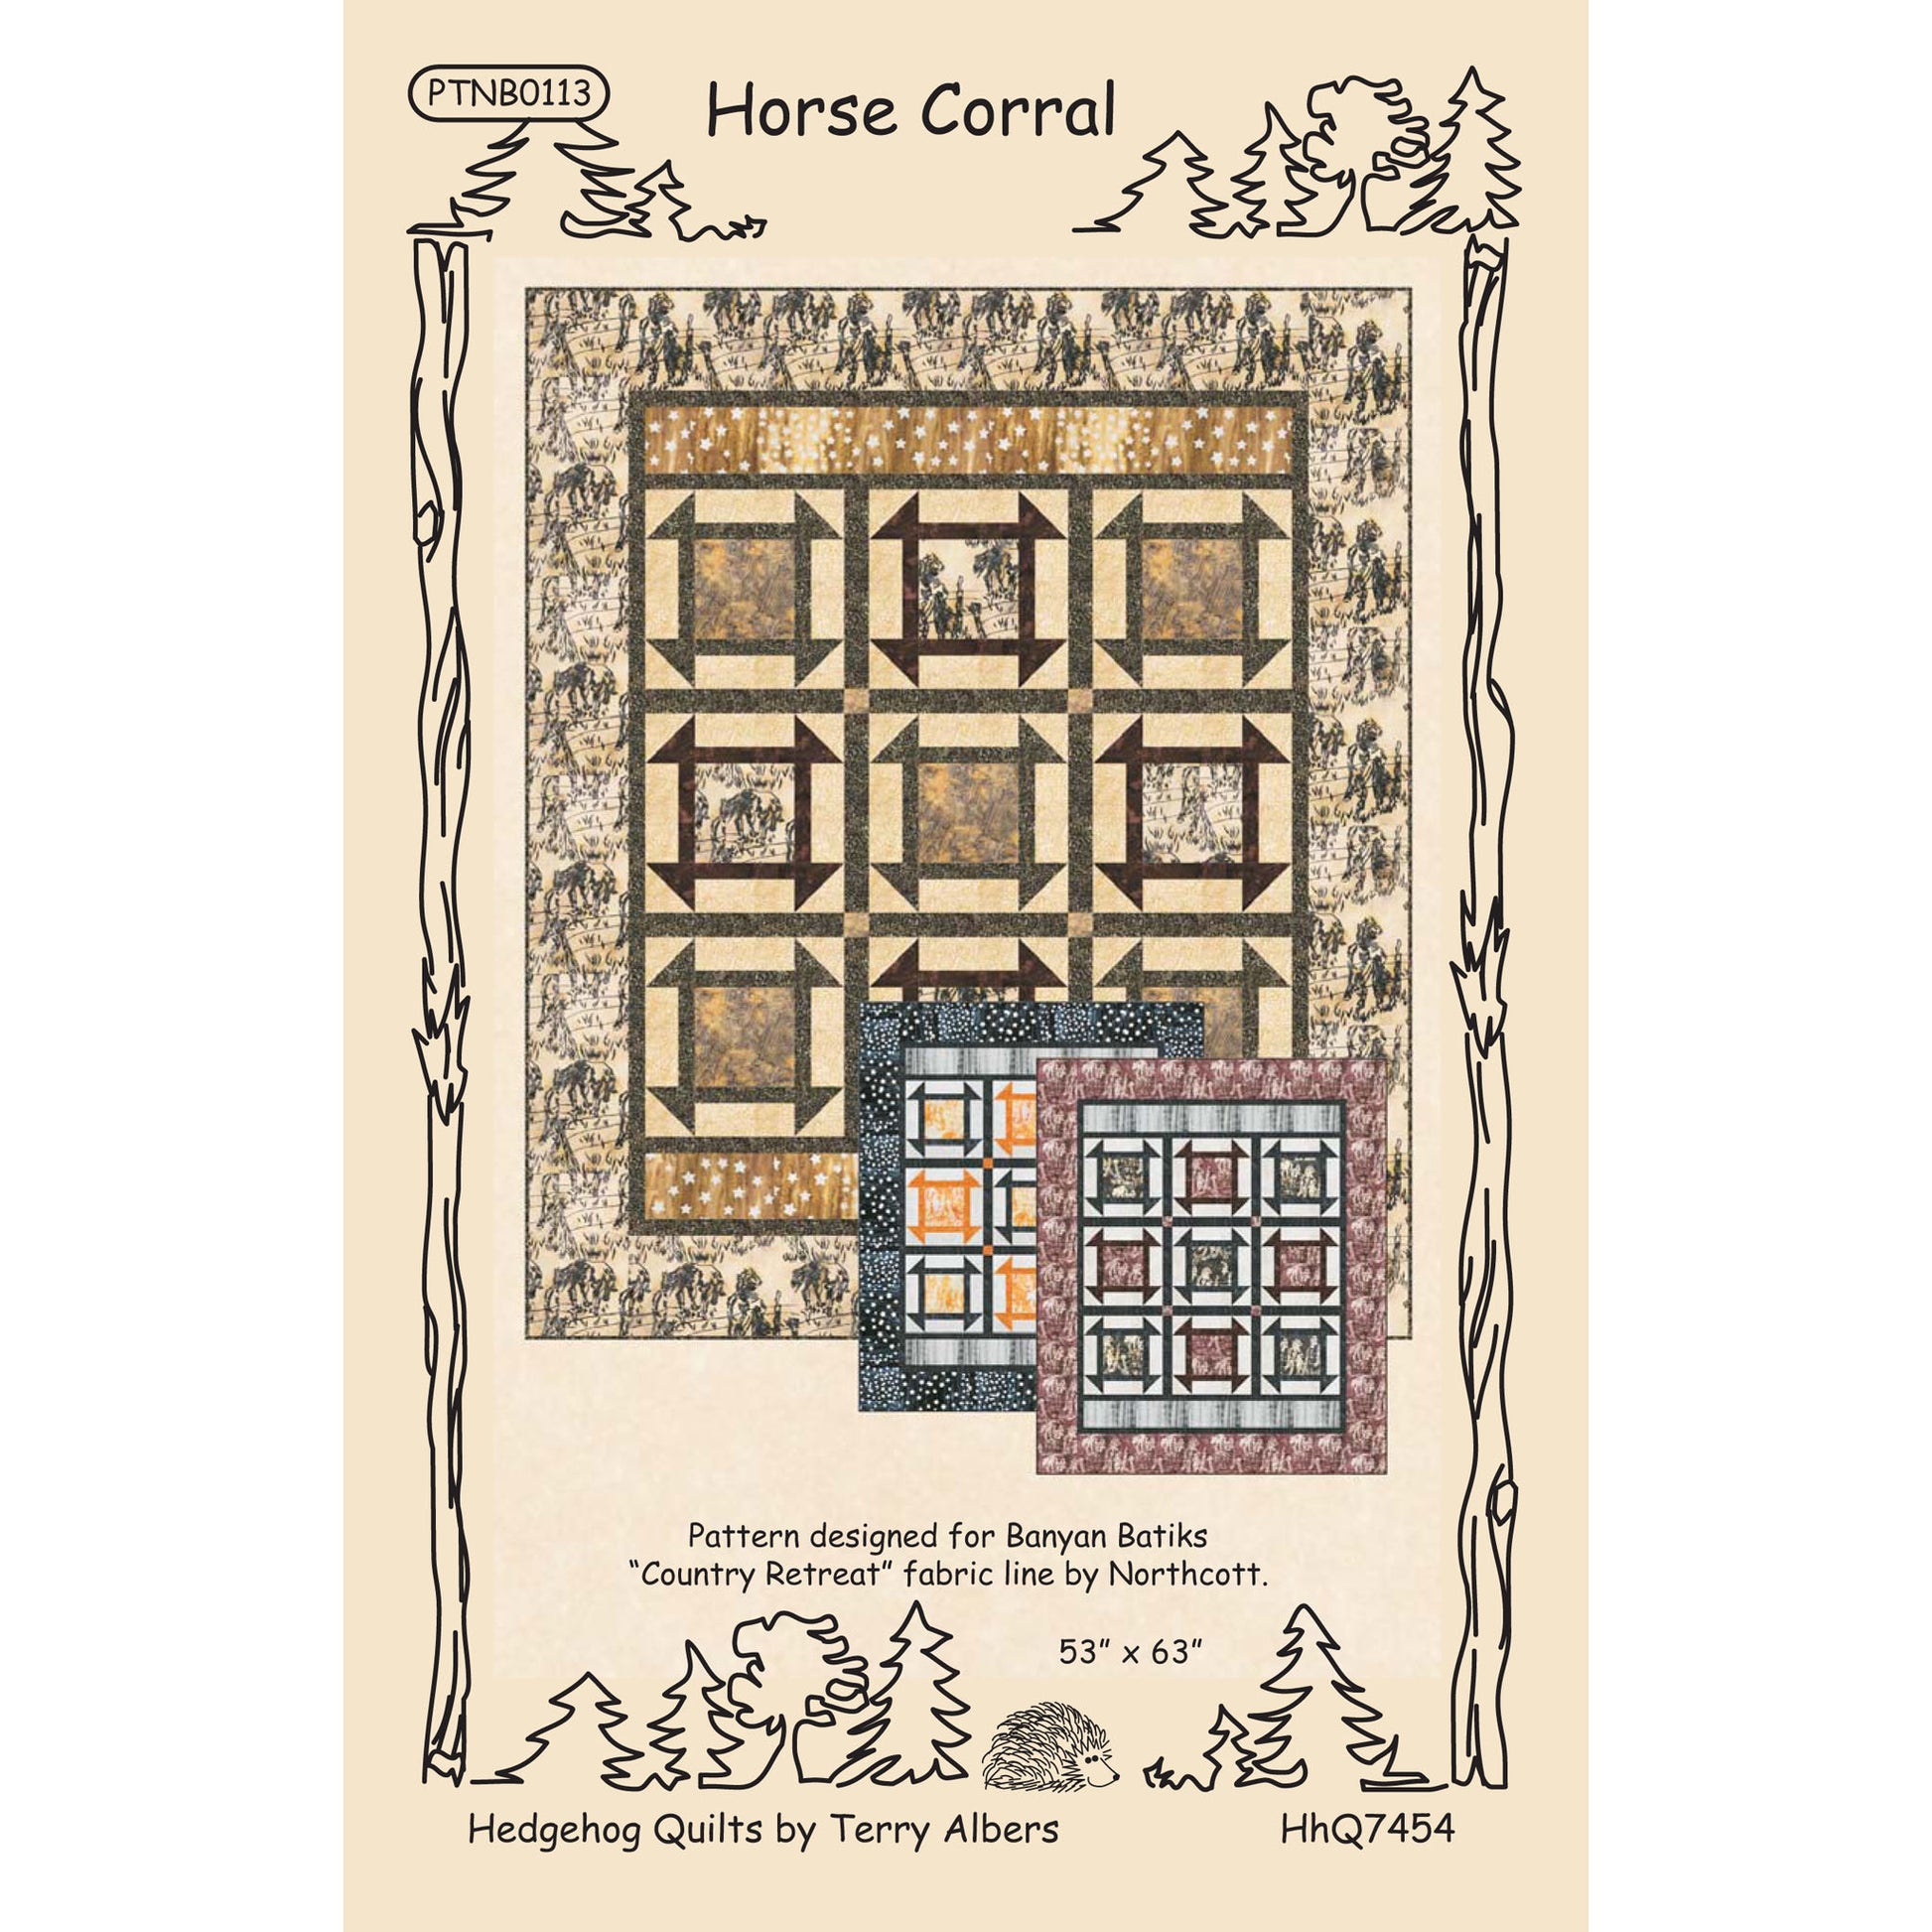 Cover image of pattern for Horse Corral Quilt.